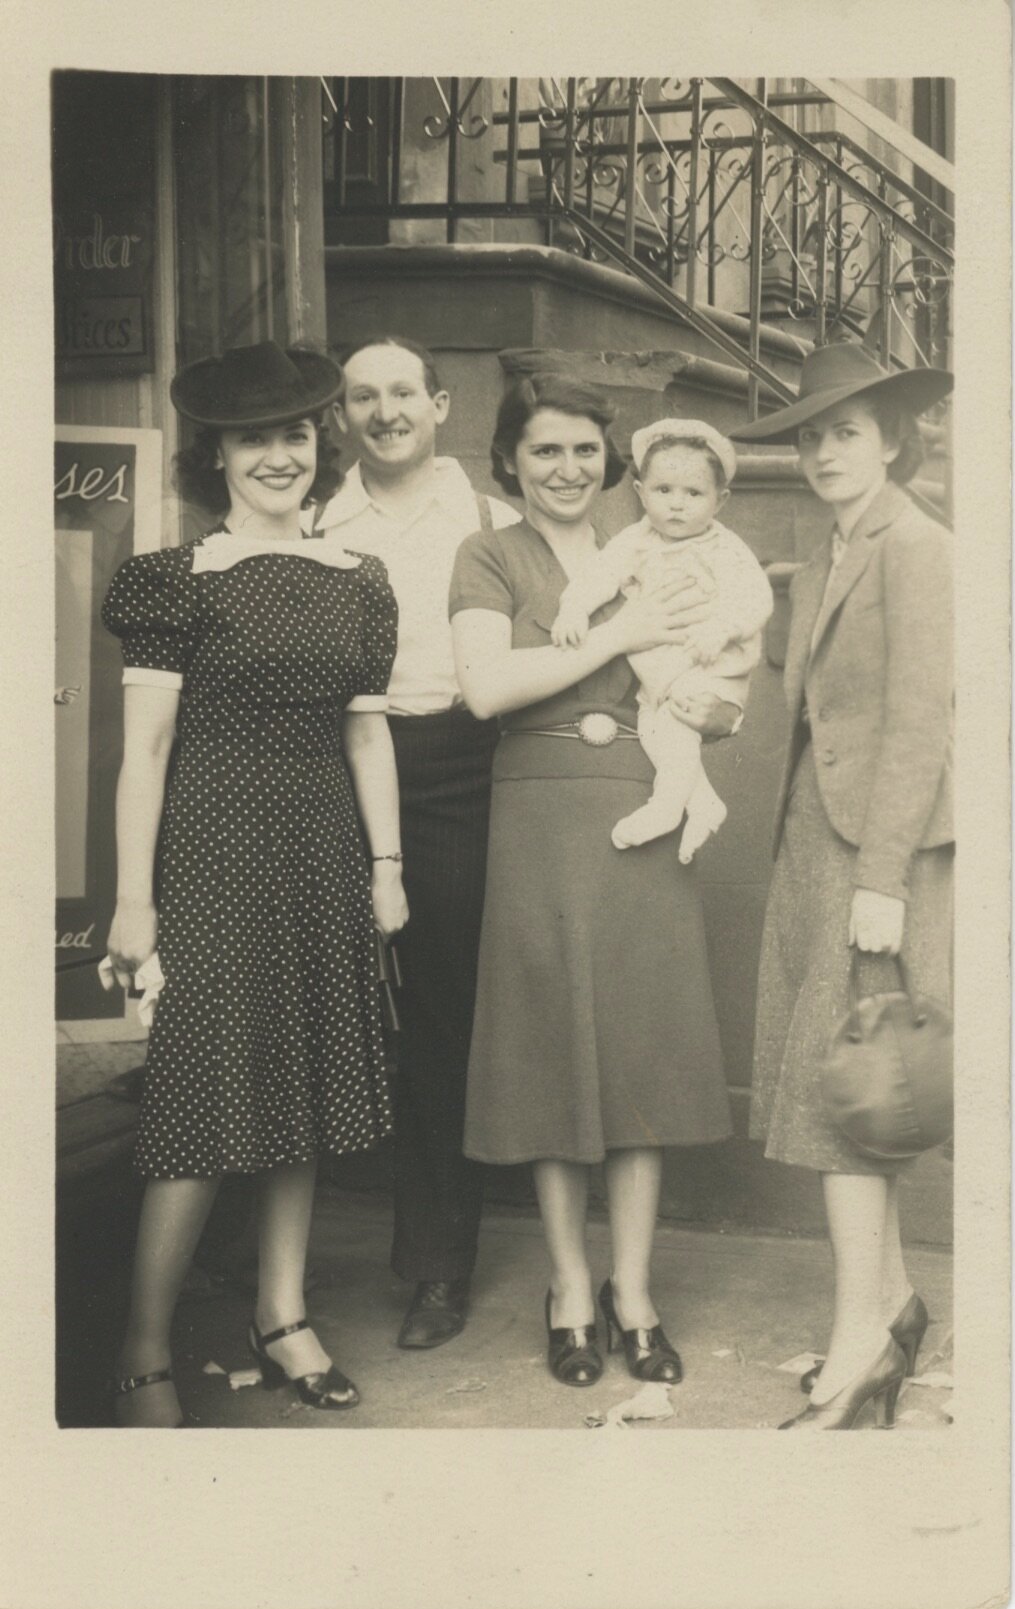 While doing that, I stumbled across this one. The baby is Alan Dershowitz.  Yes, that one.  My mom's friend, on the right, was his aunt.  My mom's on the left.